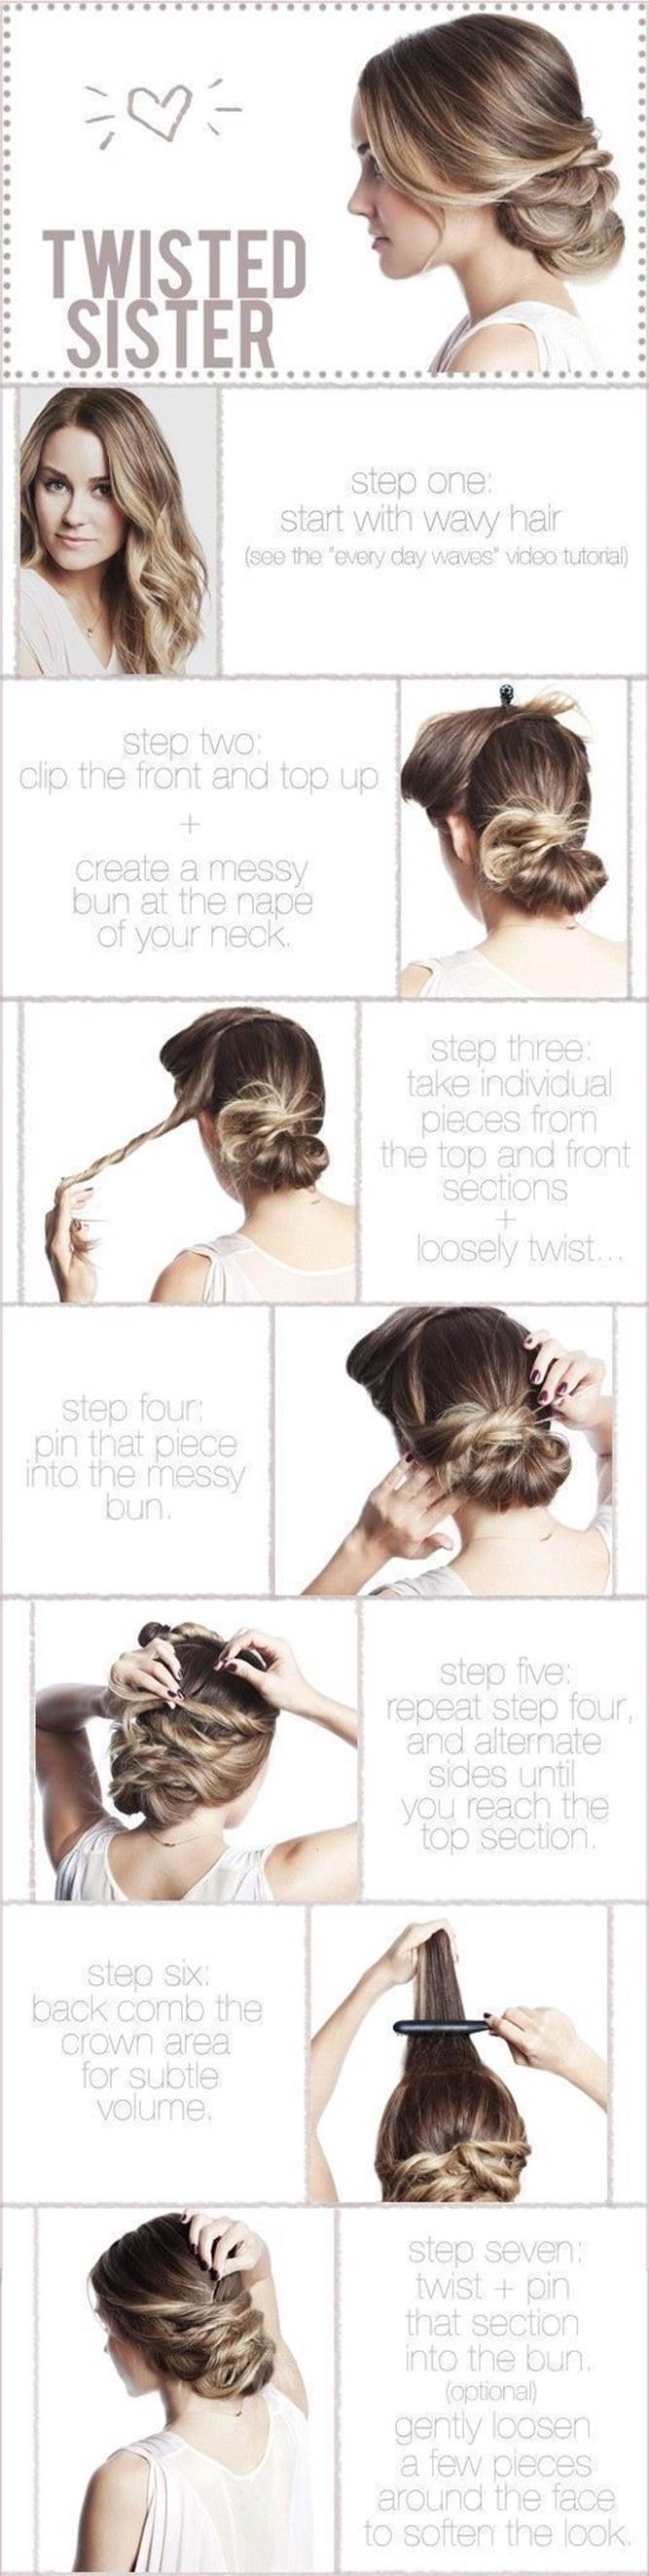 Cool DIY hairstyles for girls5 Cool DIY hairstyles for girls